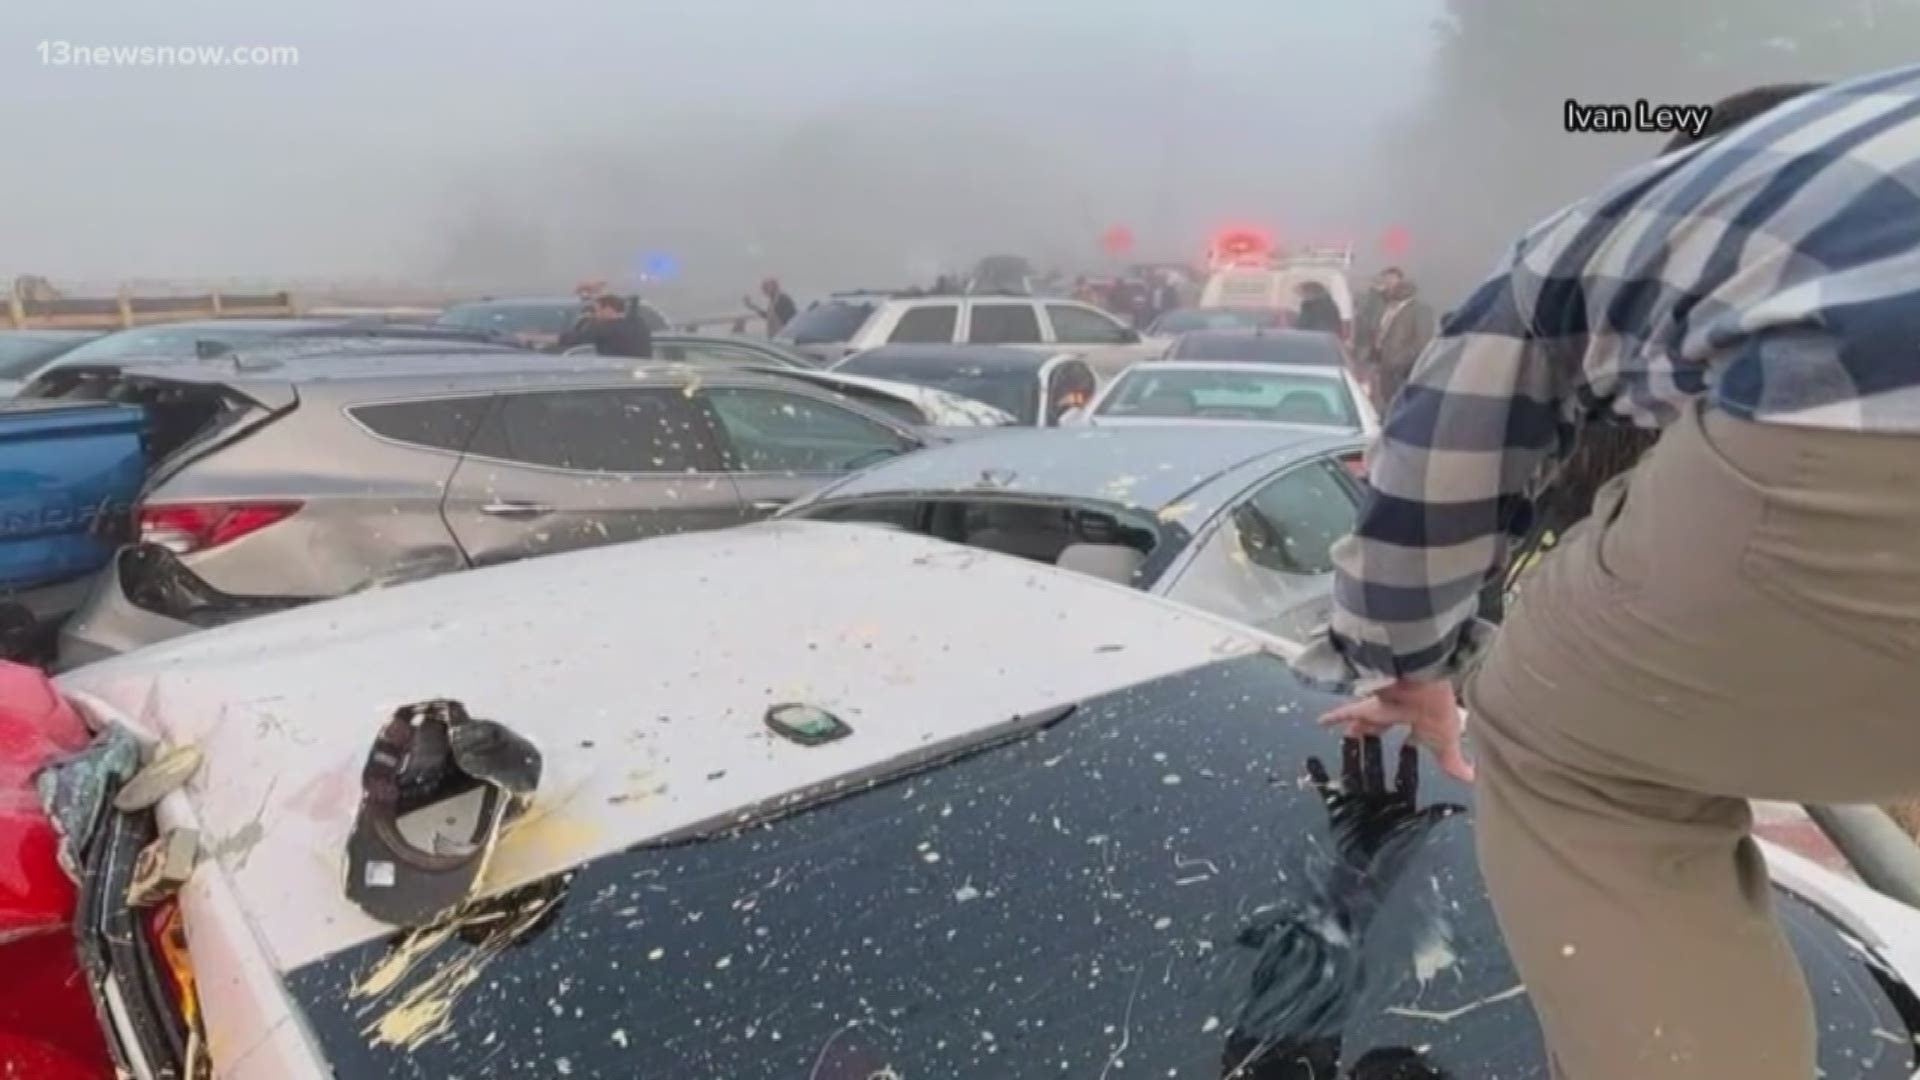 State police said the massive pileup involving 75 cars was caused by black ice and fog. No charges are pending at this time.